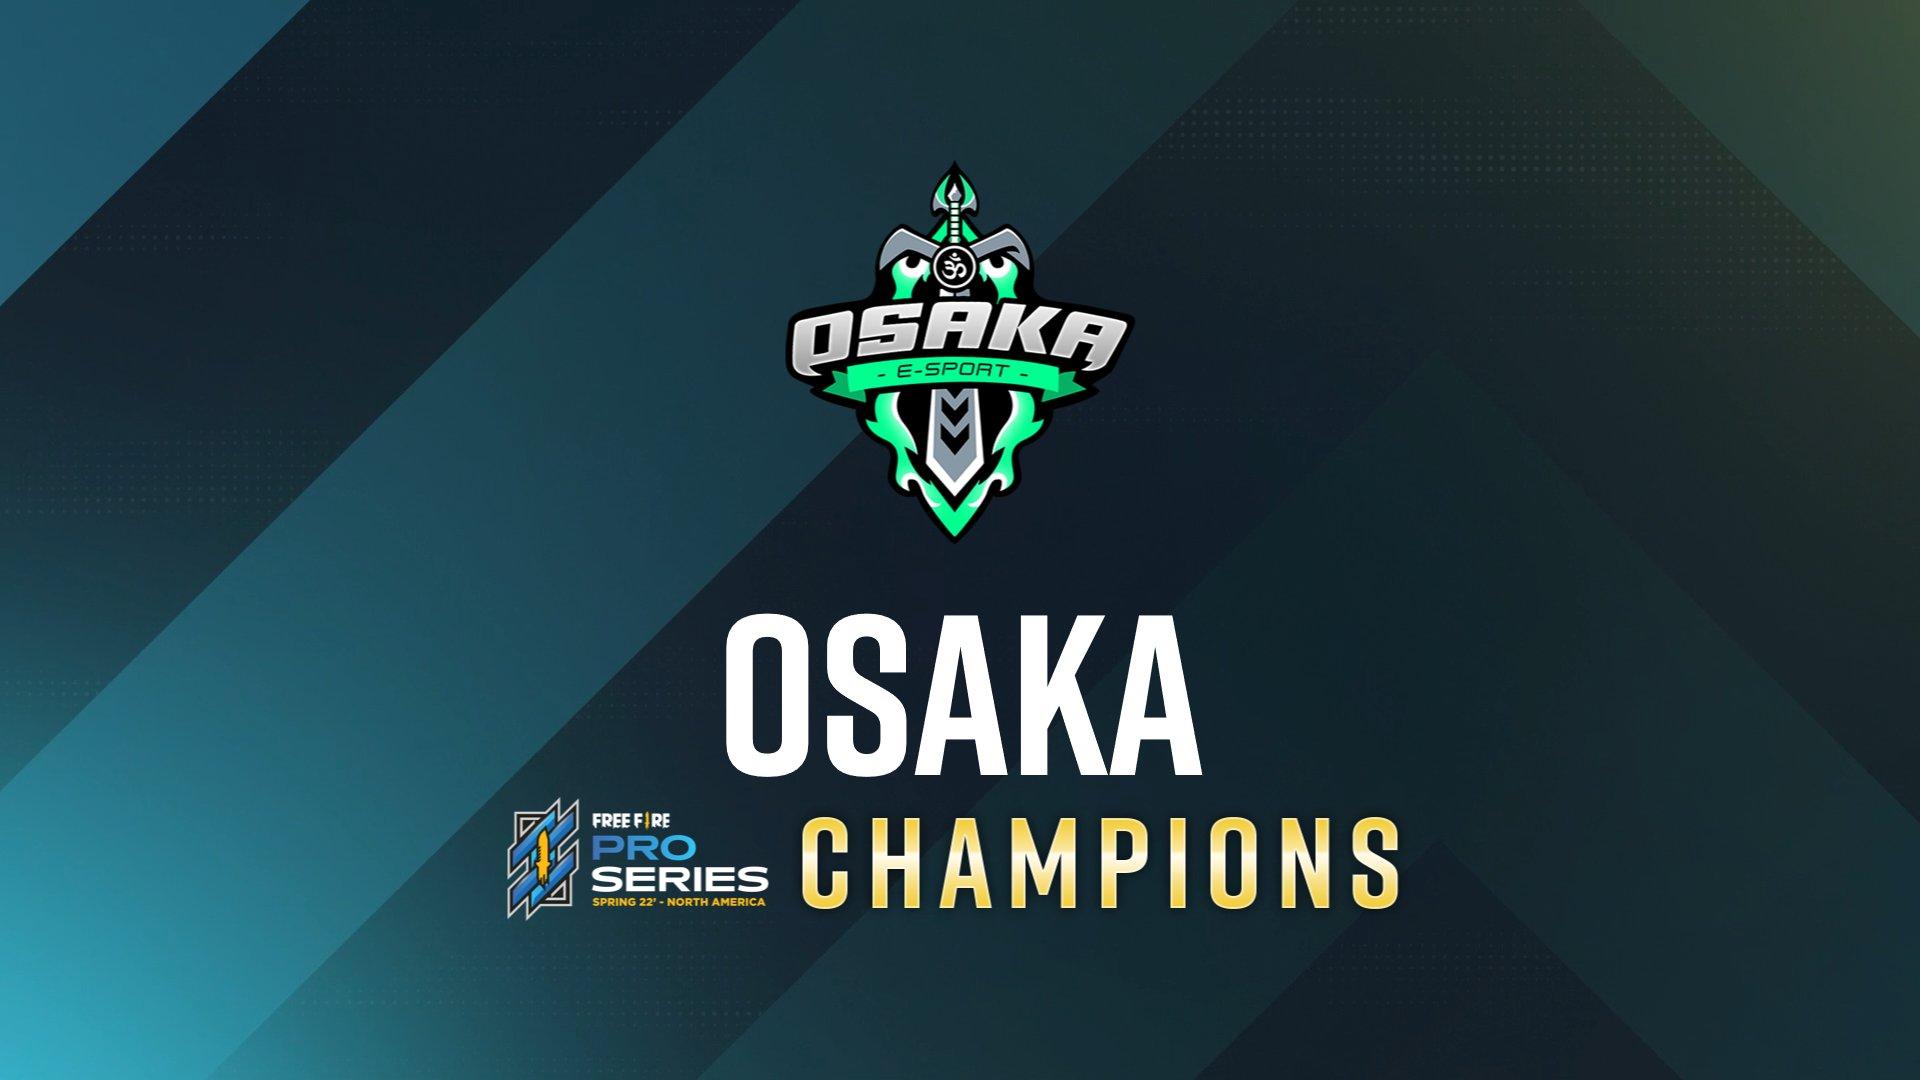 Osaka wins the Free Fire Pro Series in the USA and qualifies for the world